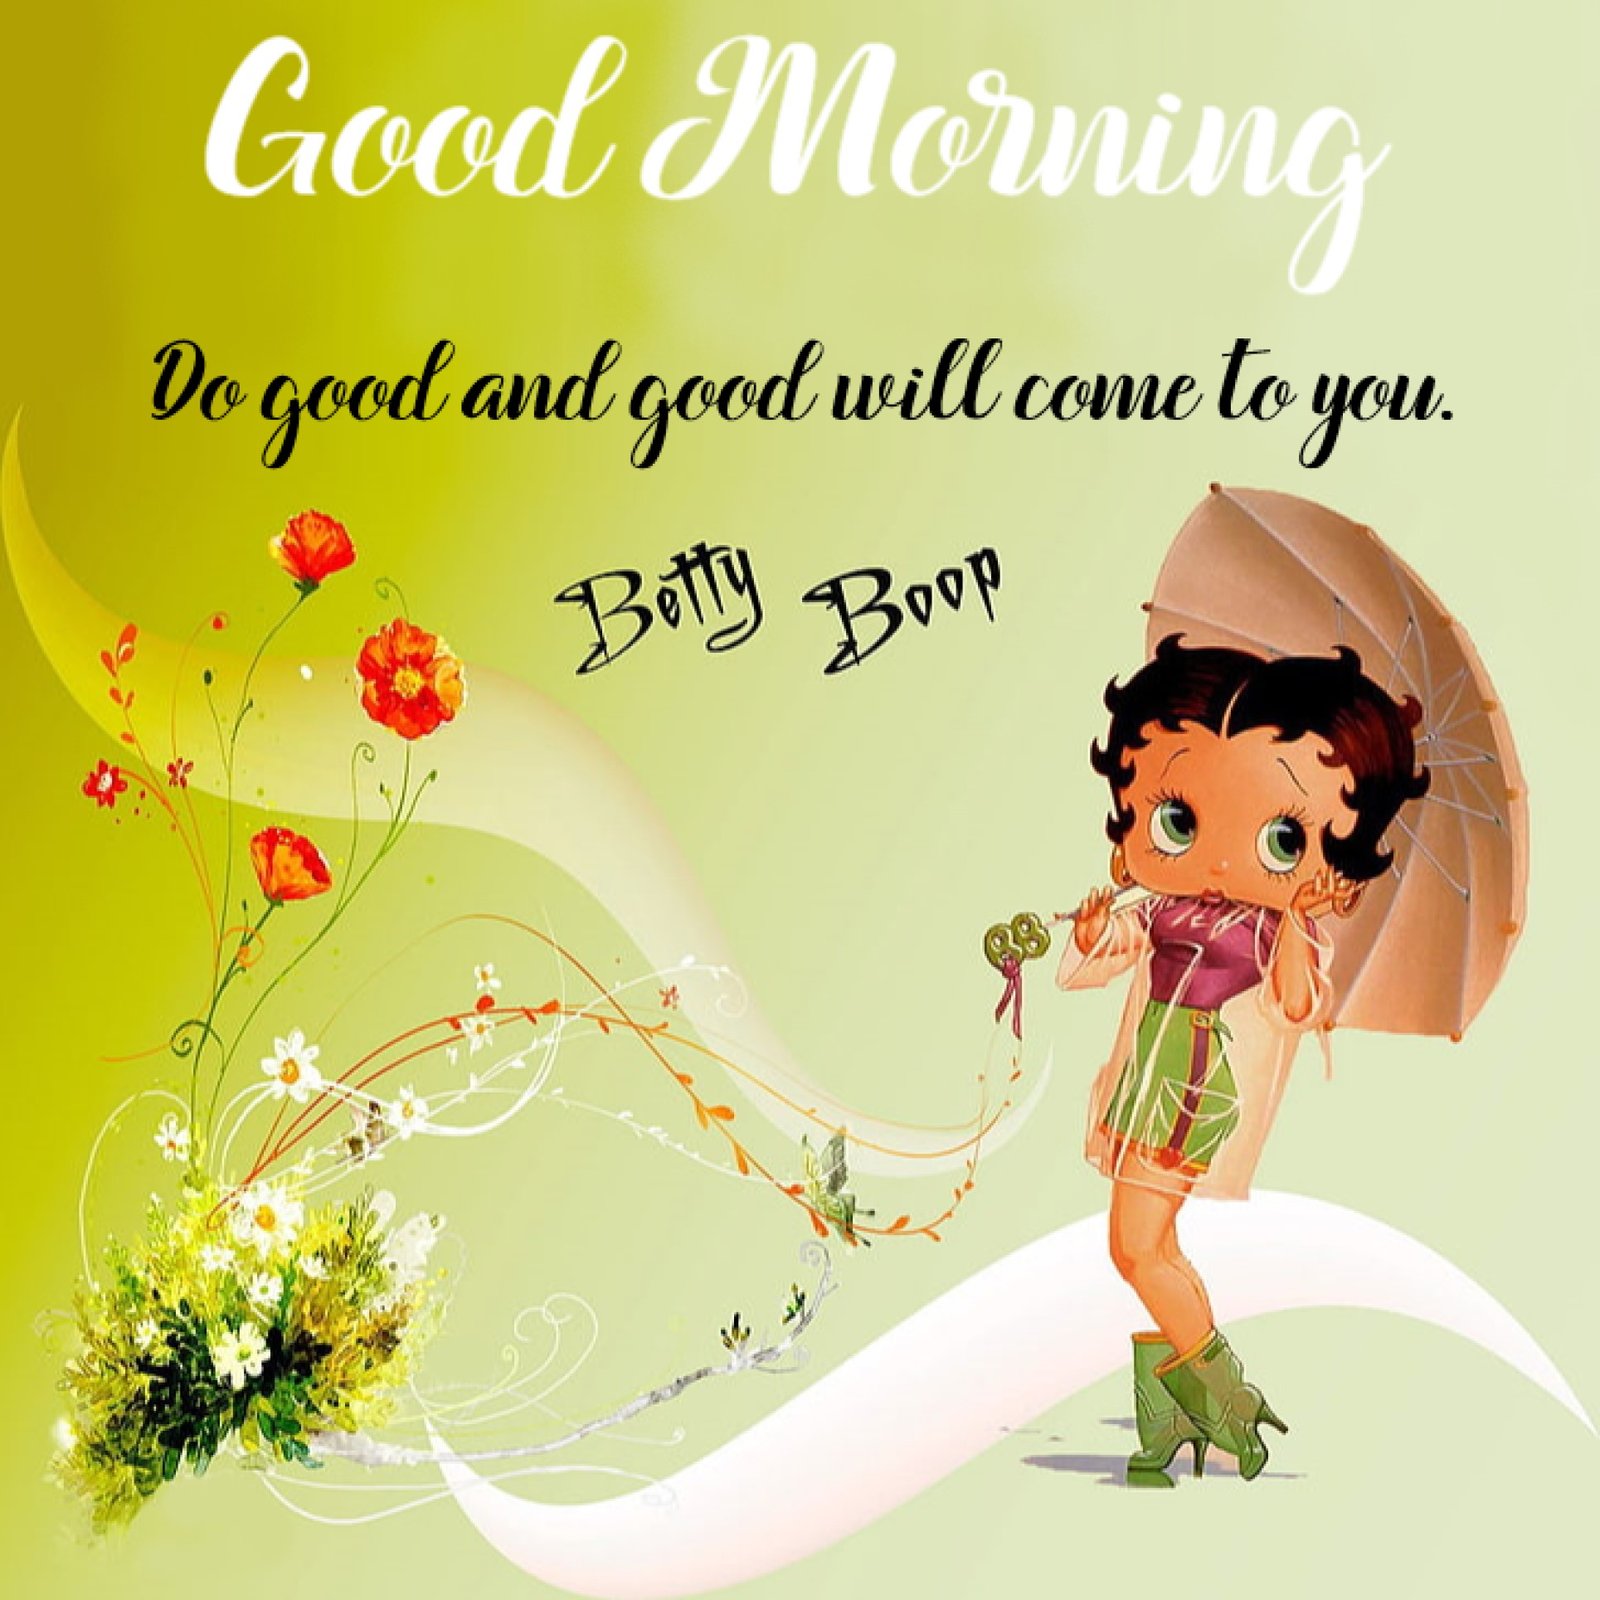 Betty Boop Good Morning Pictures vernon il